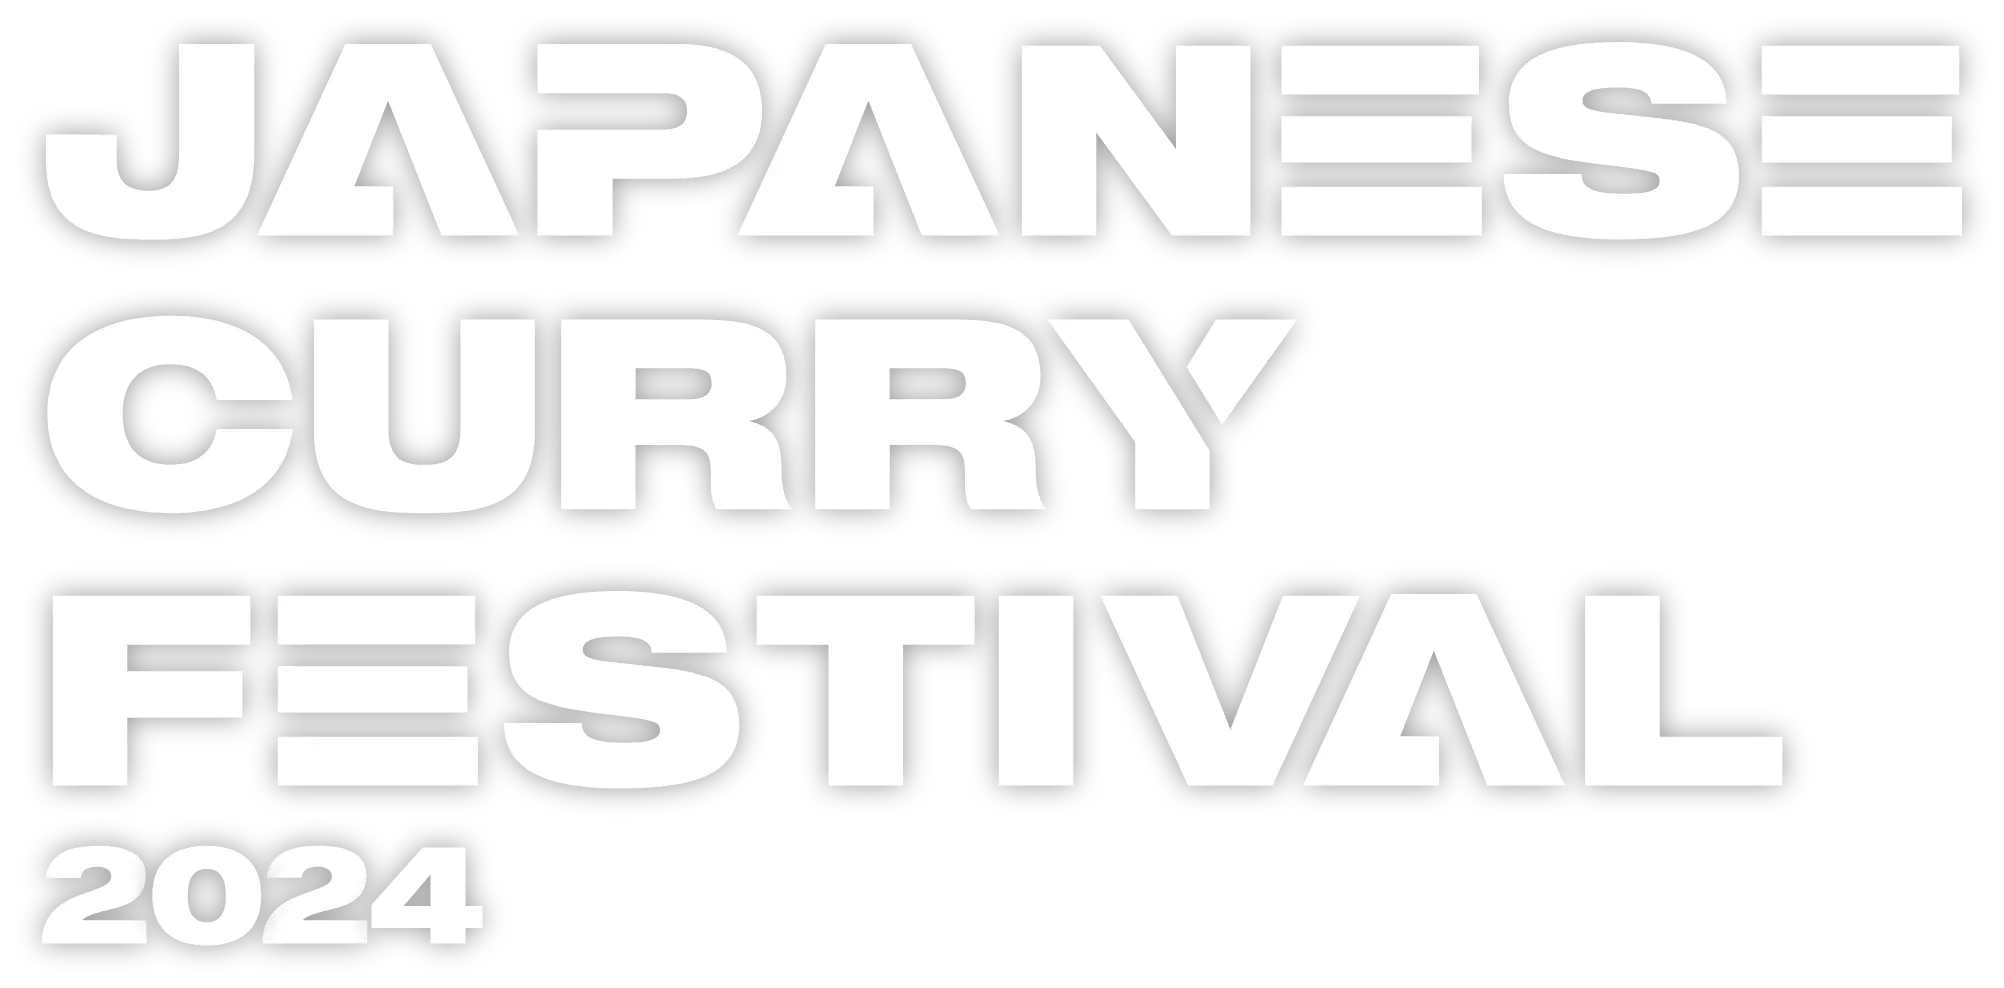 JAPANESE CURRY FESTIVAL 2024